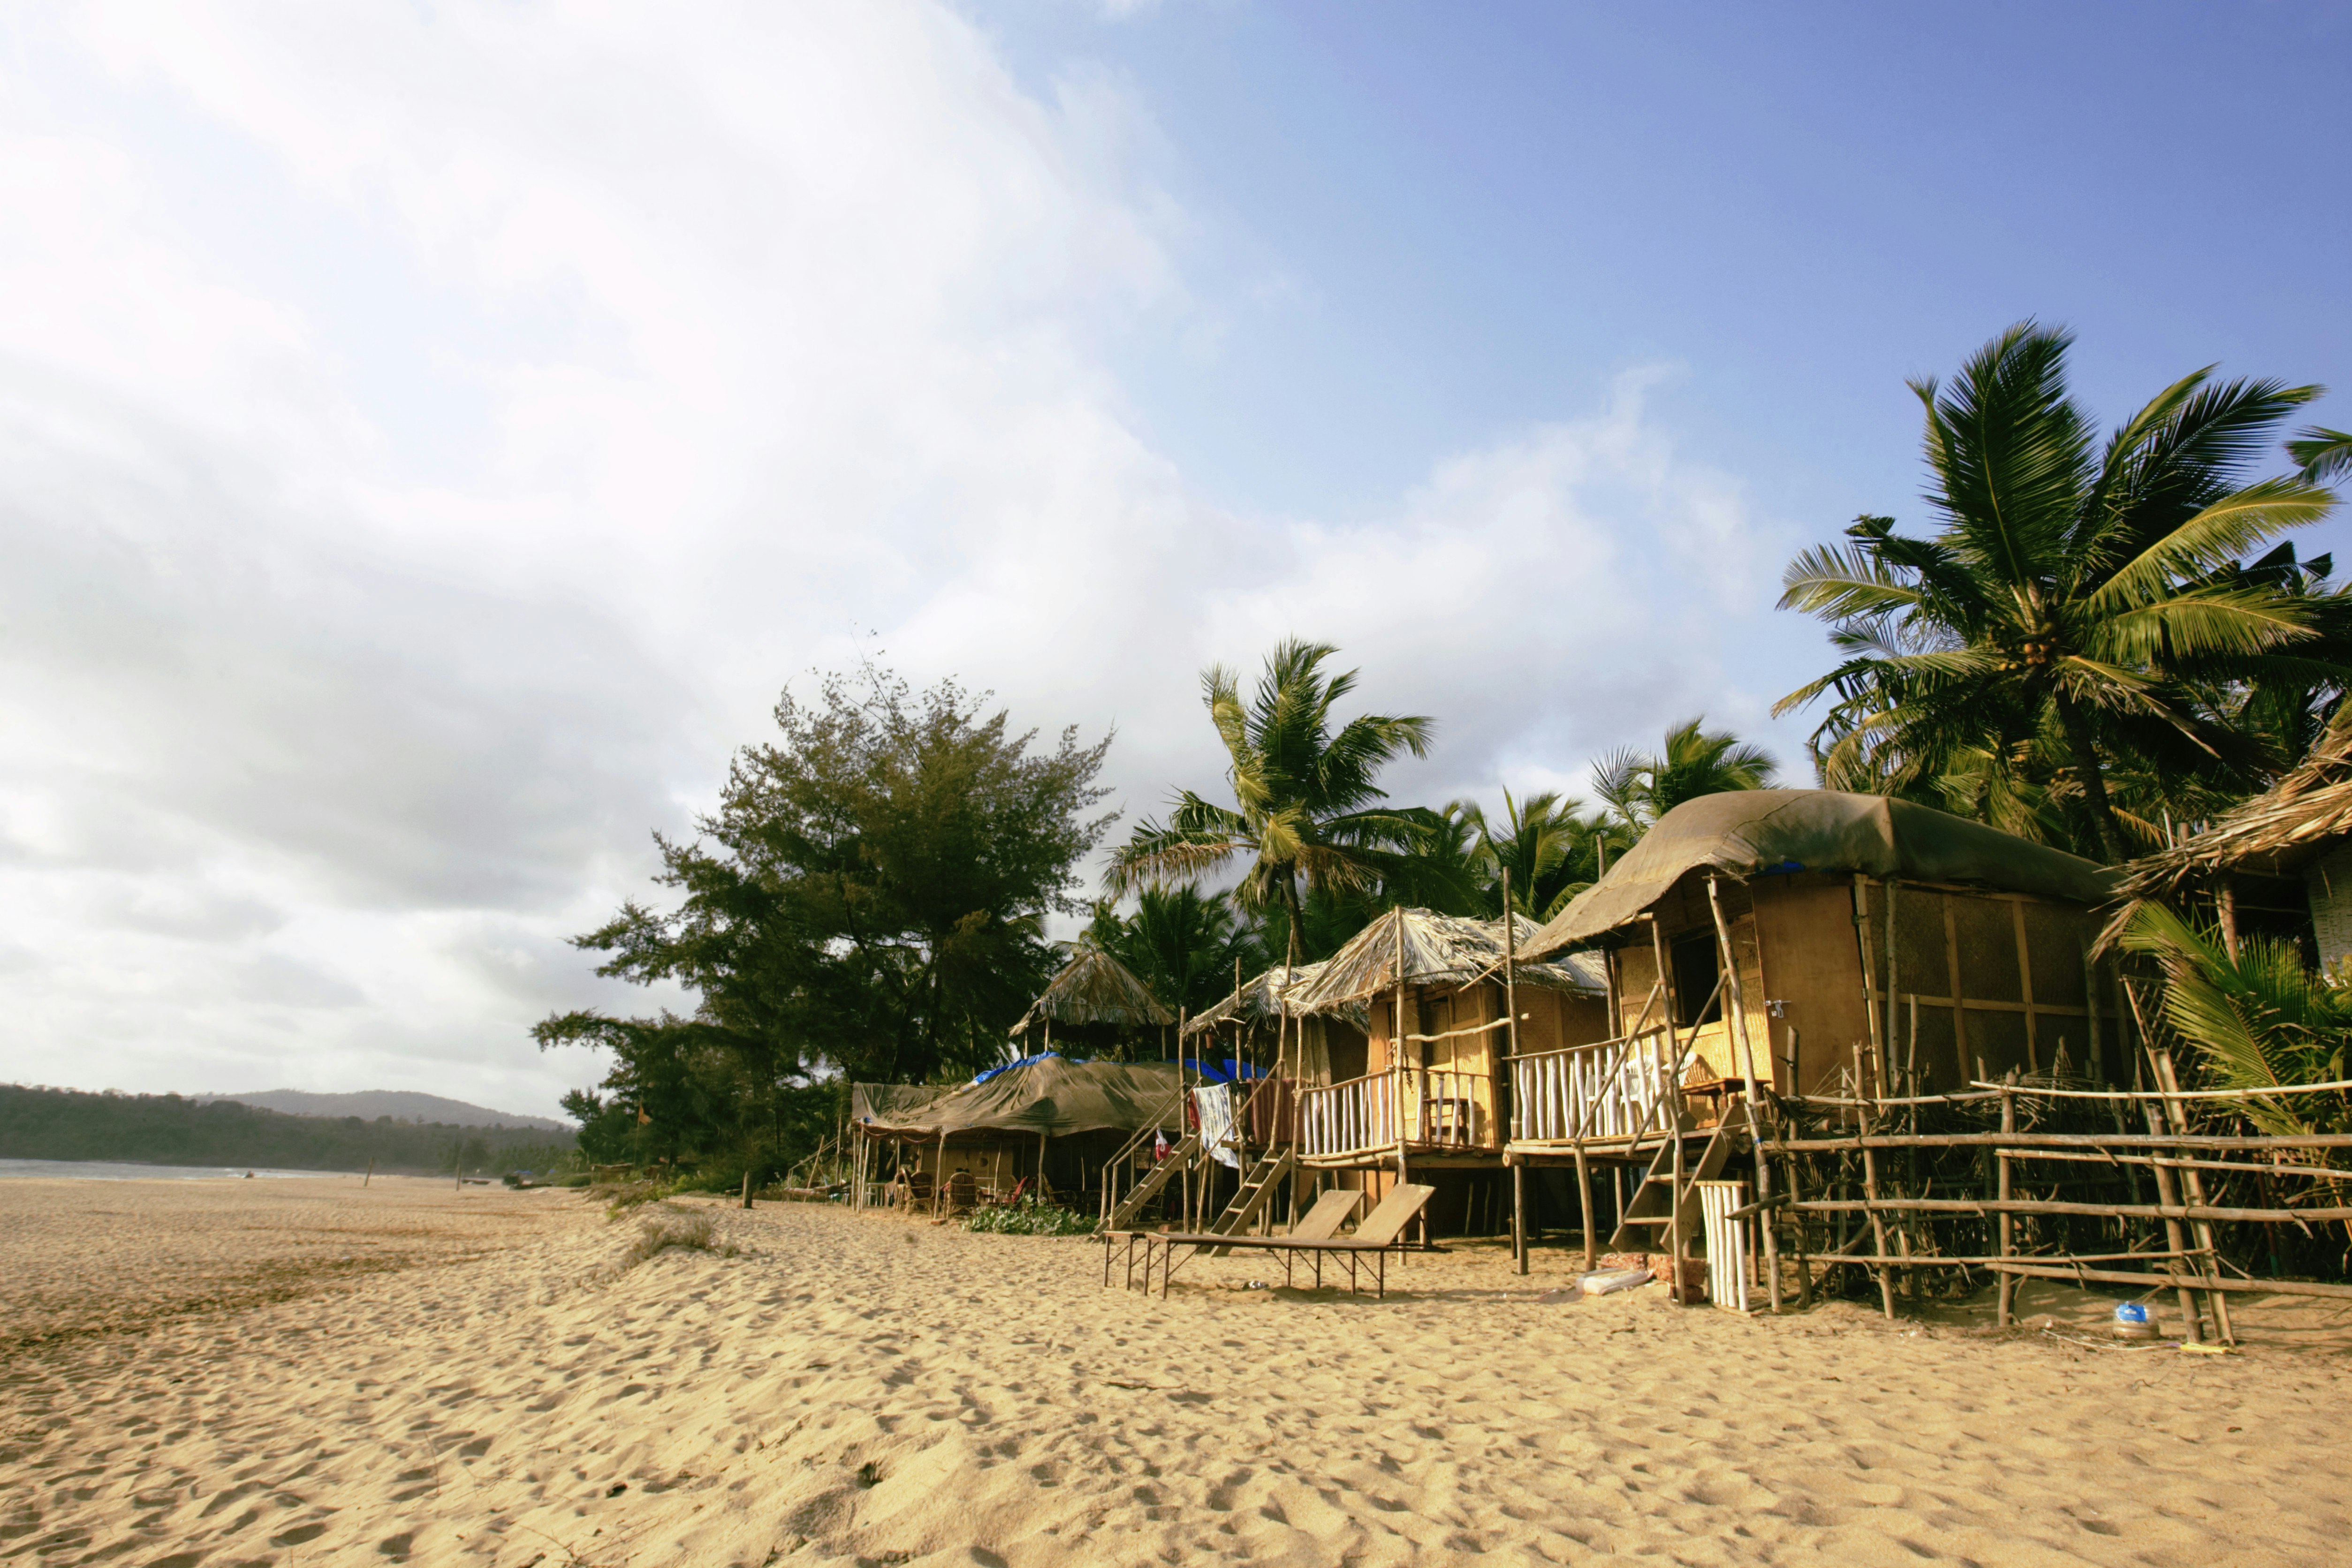 Huts, trees, sand and the beach